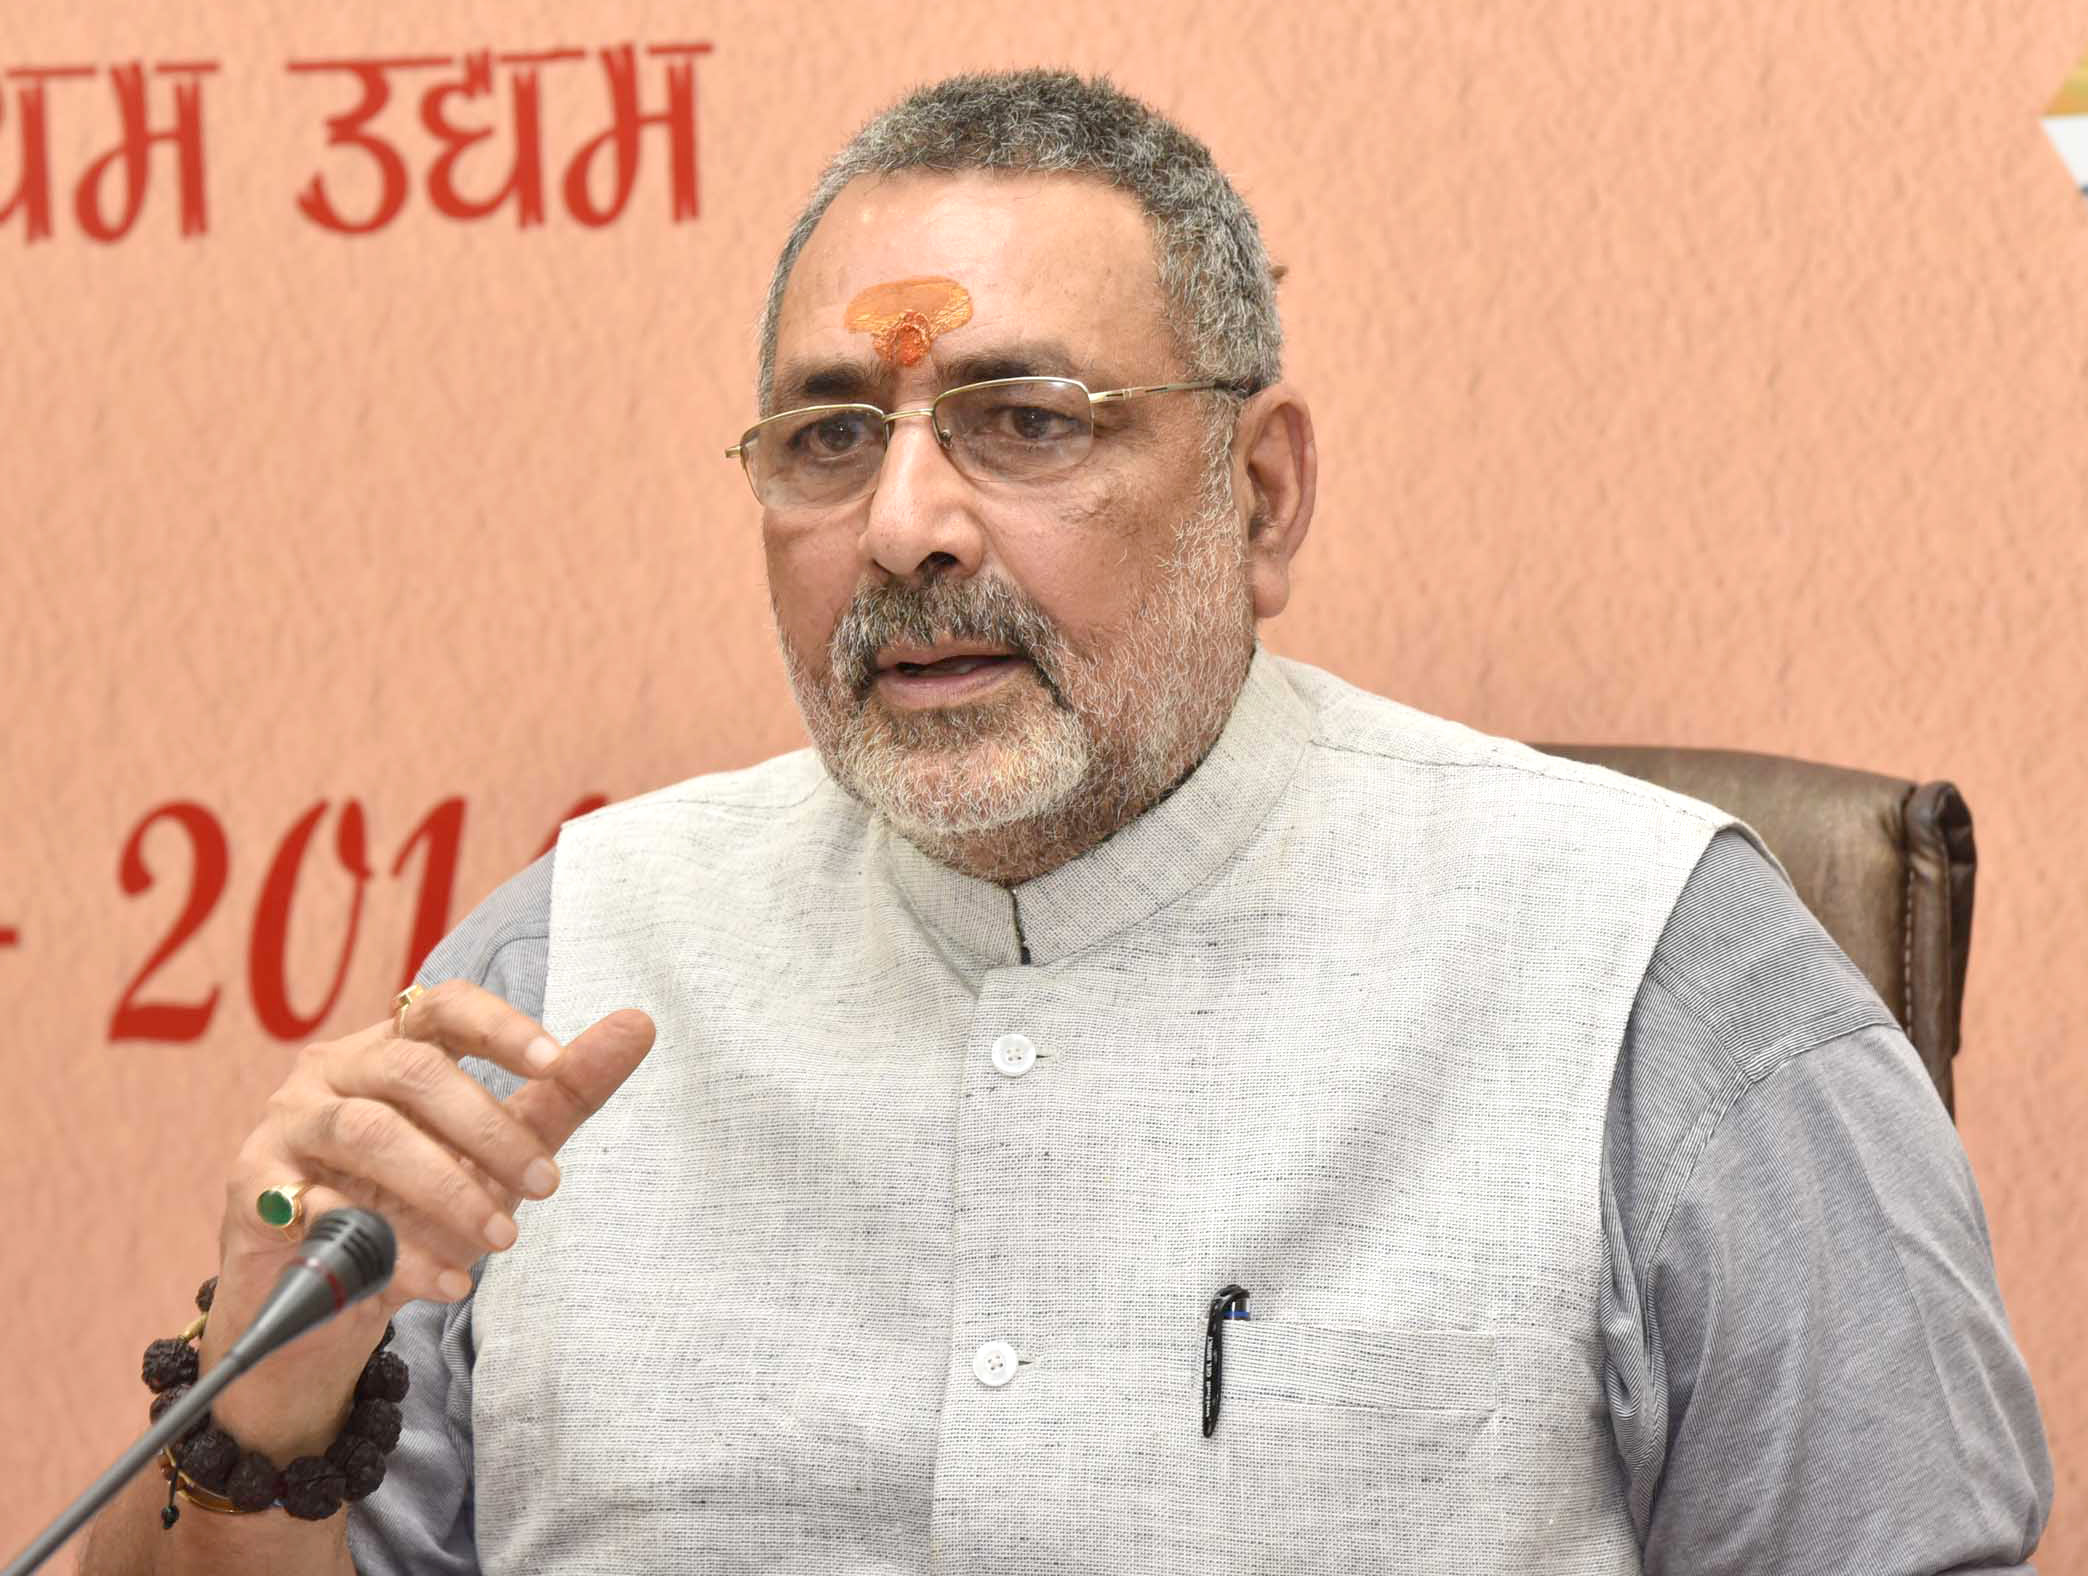 The Minister of State for Micro, Small & Medium Enterprises (I/C), Shri Giriraj Singh addressing a press conference on the achievements of the Ministry of Micro, Small & Medium Enterprises, during the last four years, in New Delhi on June 13, 2018.